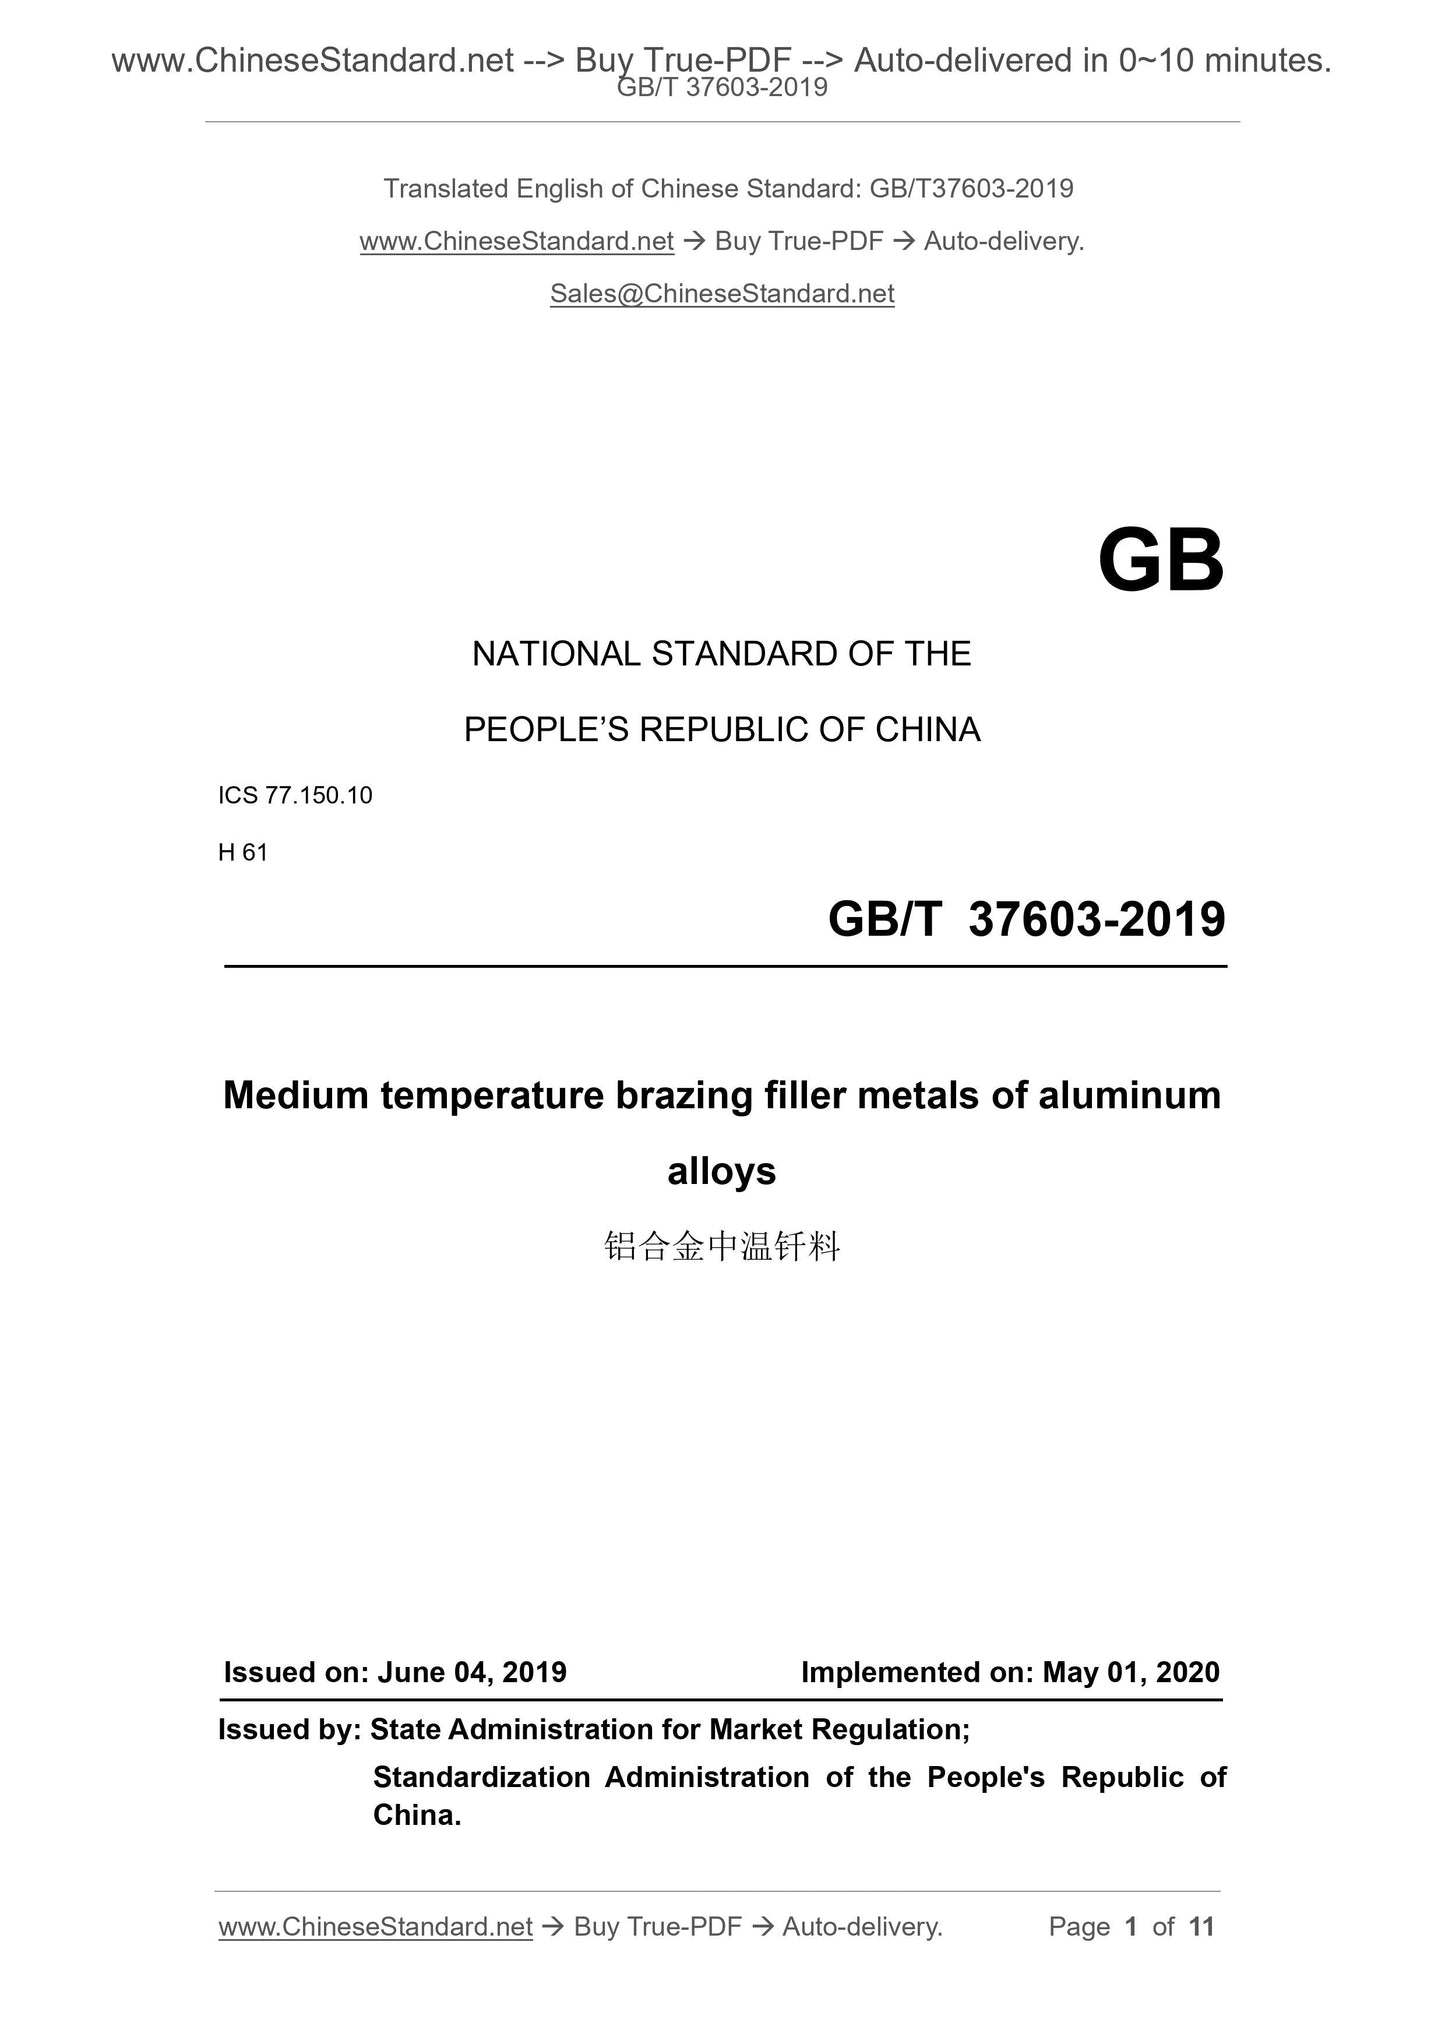 GB/T 37603-2019 Page 1